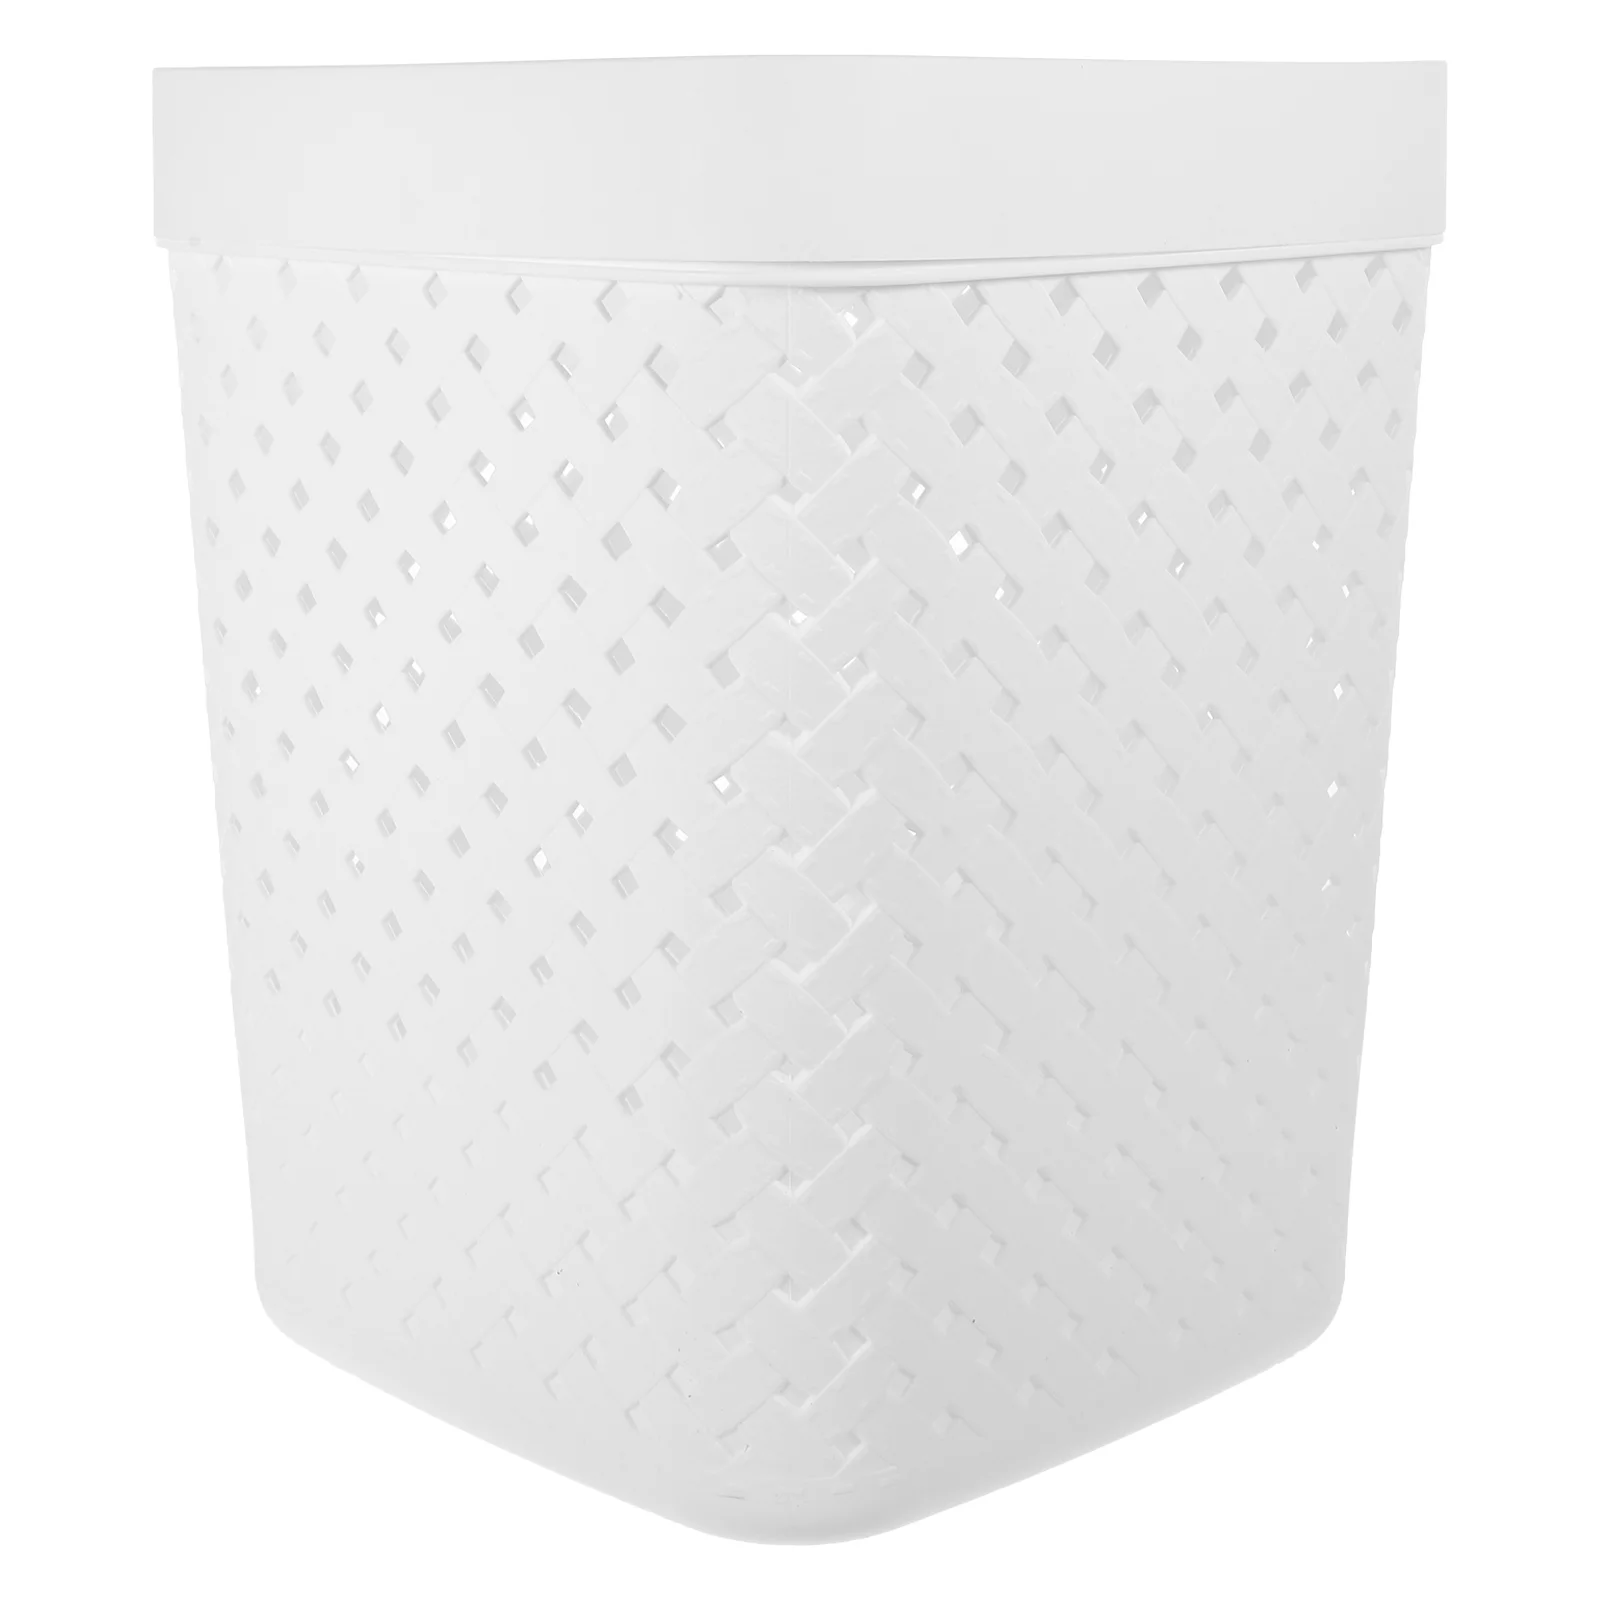 

Rubbish Can Plastic Wastebasket Plastic Garbage Can Container Trash Can for Bathroom Home